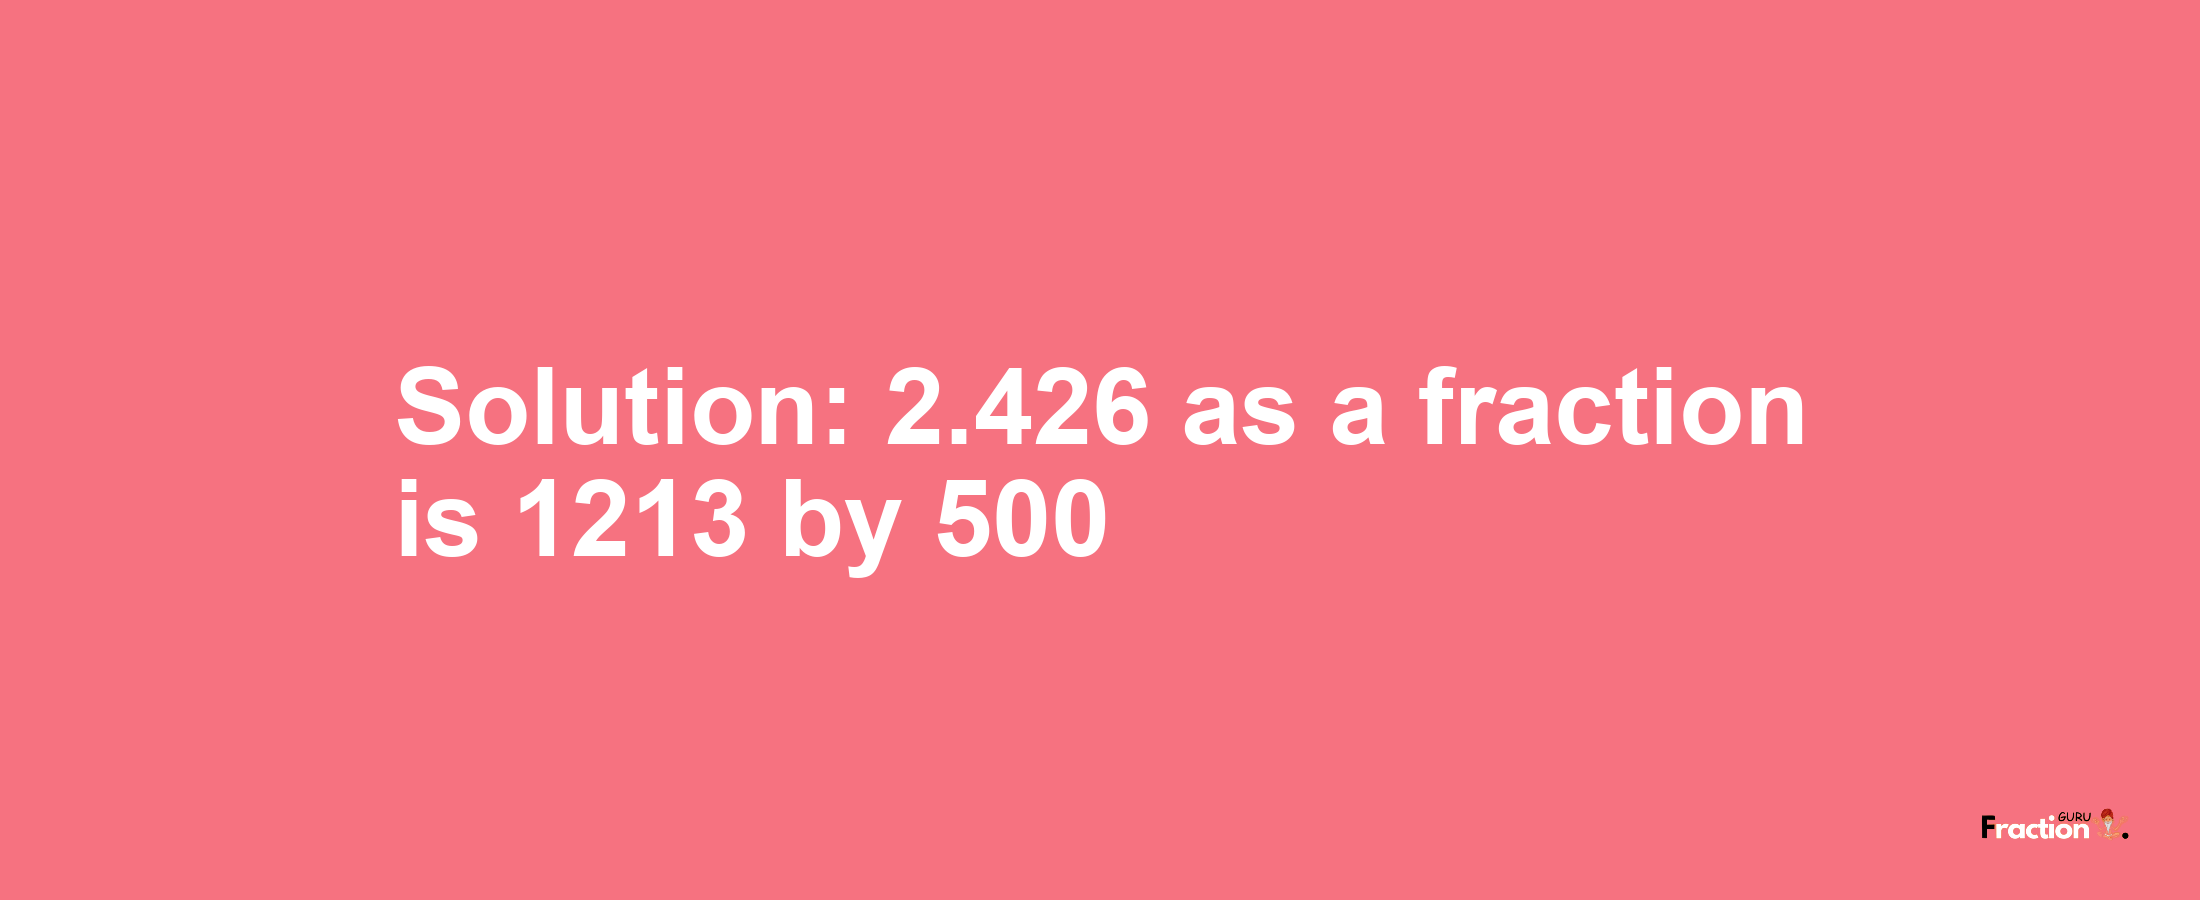 Solution:2.426 as a fraction is 1213/500